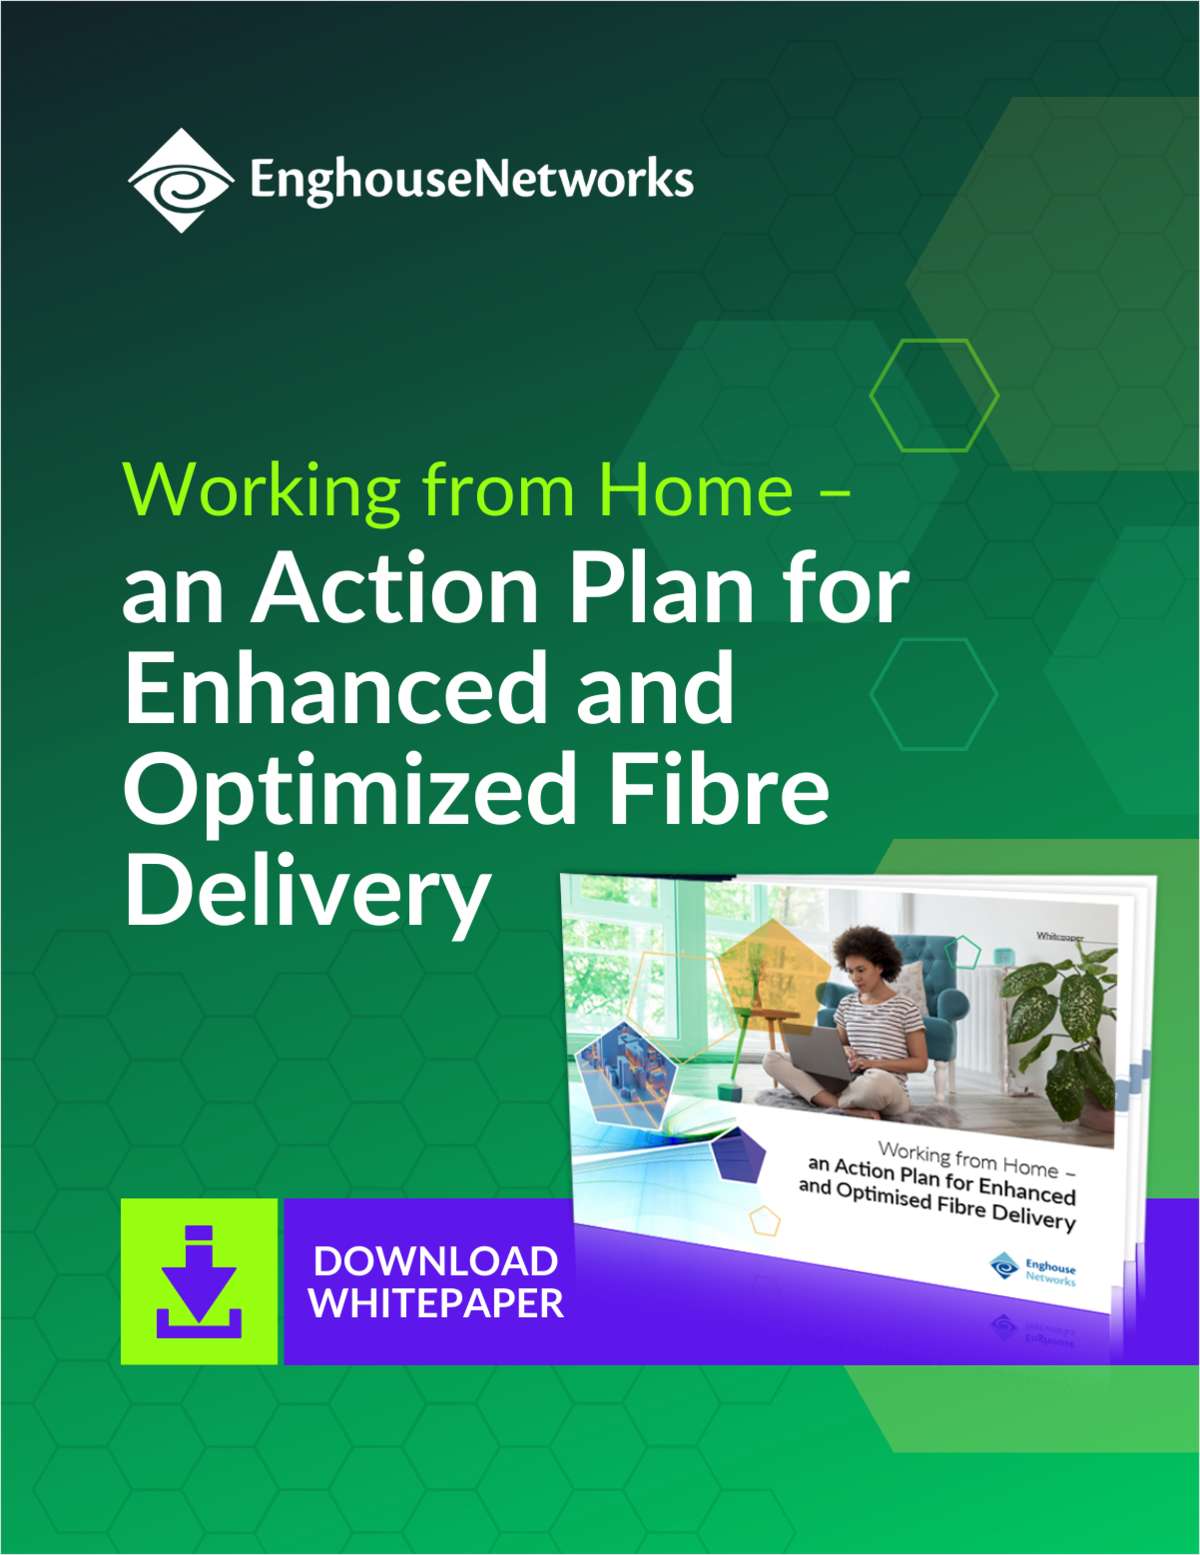 Working From Home -- An Action Plan For Enhanced And Optimized Fibre Broadband Delivery